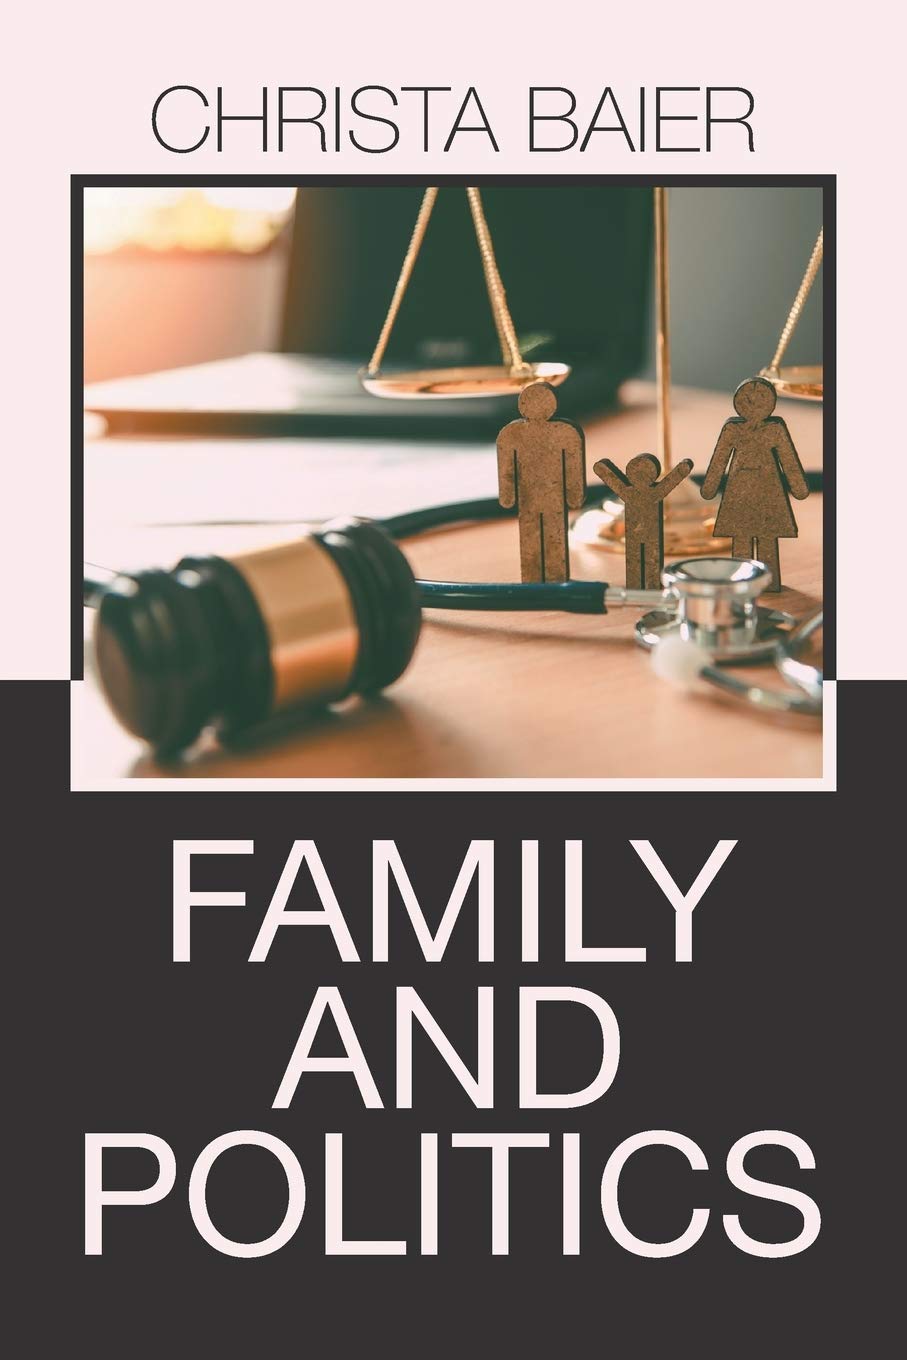 Christa Baier Addresses Family and Politics in Her Book With Support from Author’s Tranquility Press